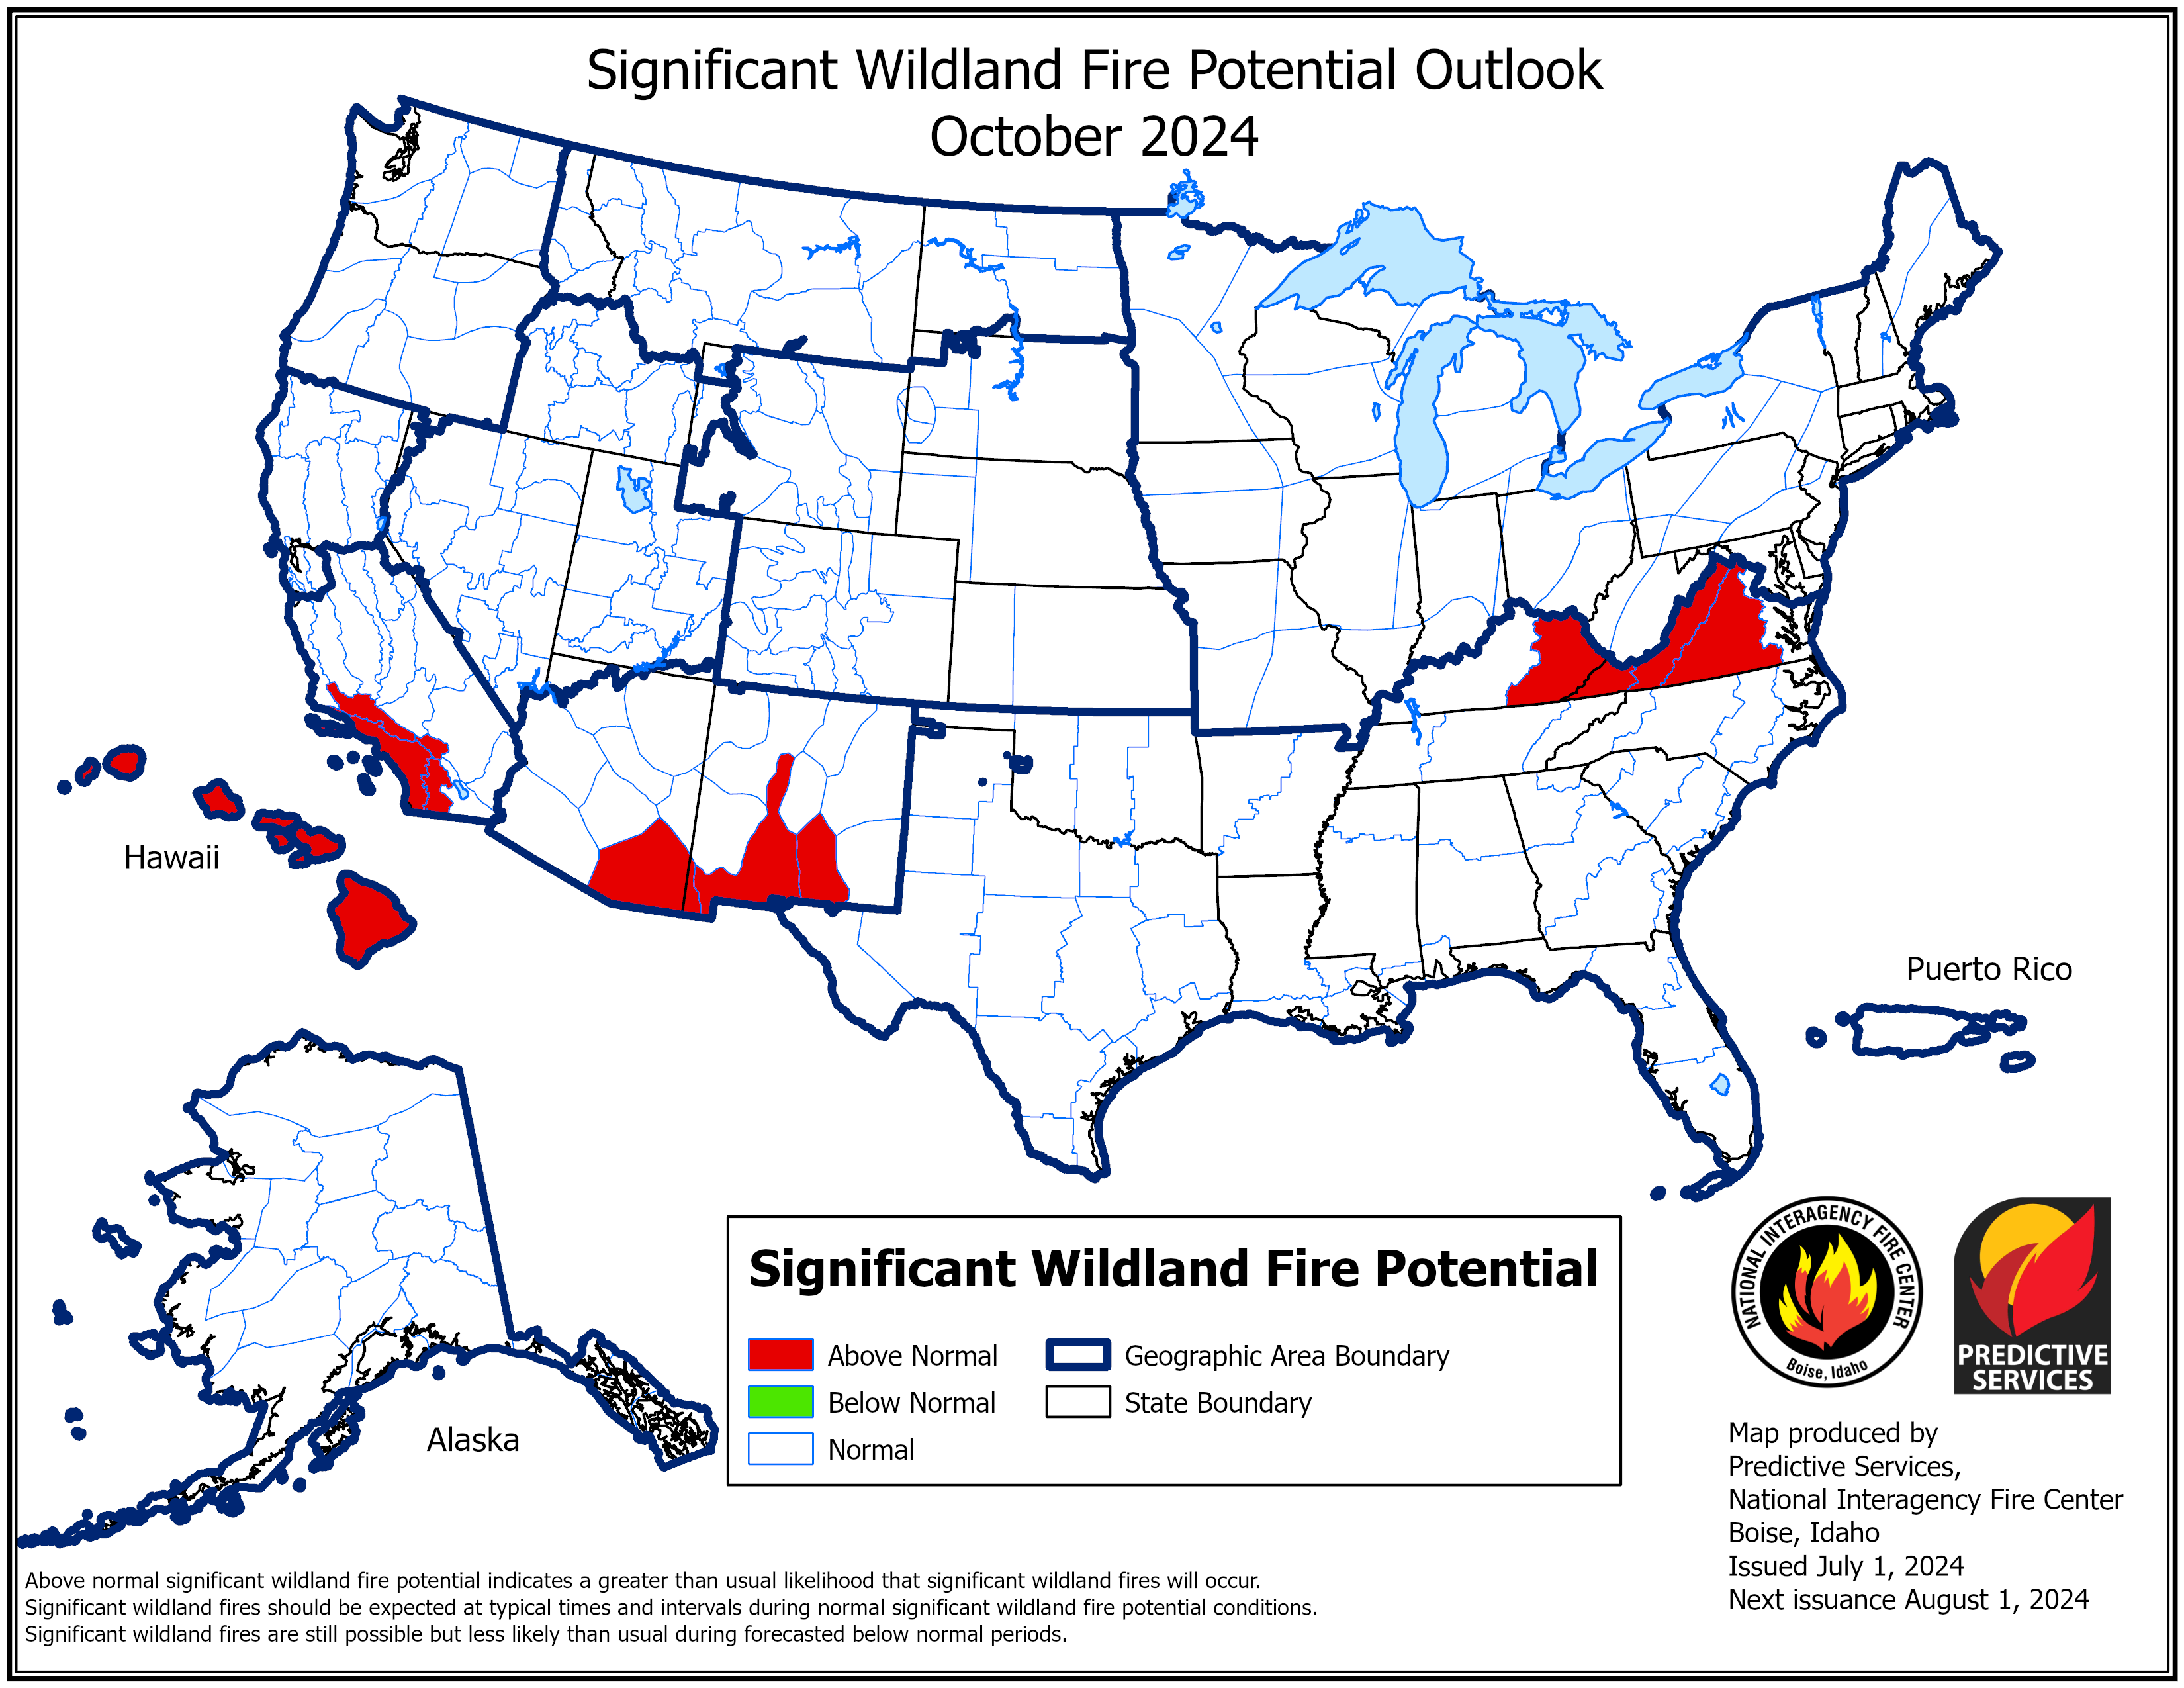 Significant Fire Potential Outlook Image for October